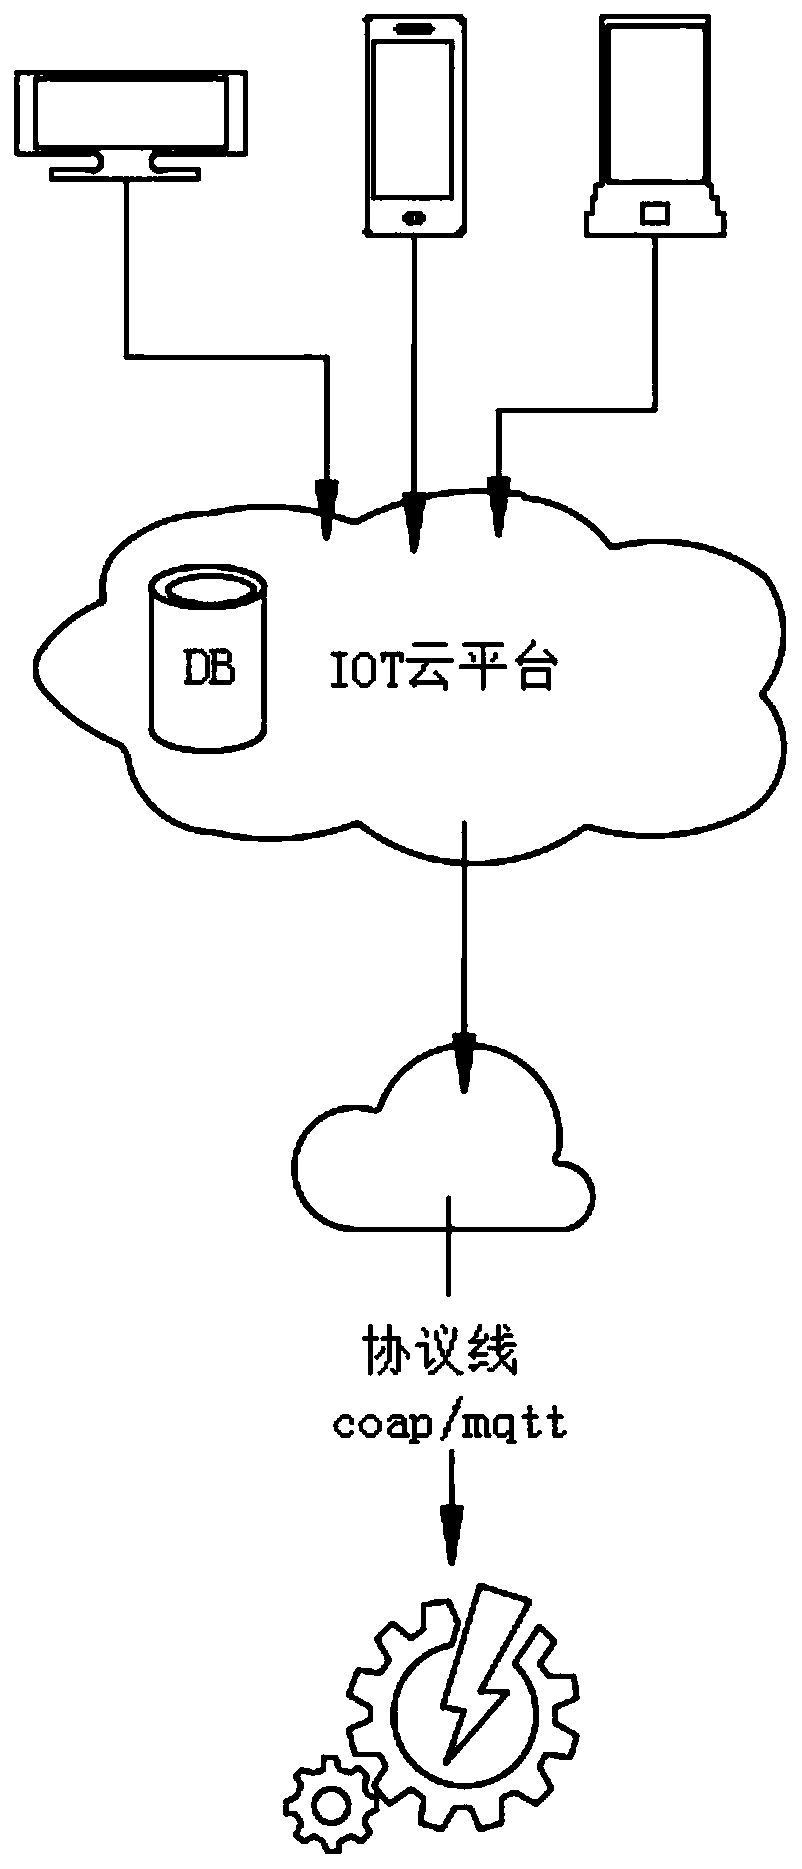 Method for realizing instant messaging through Internet of Things COAP protocol